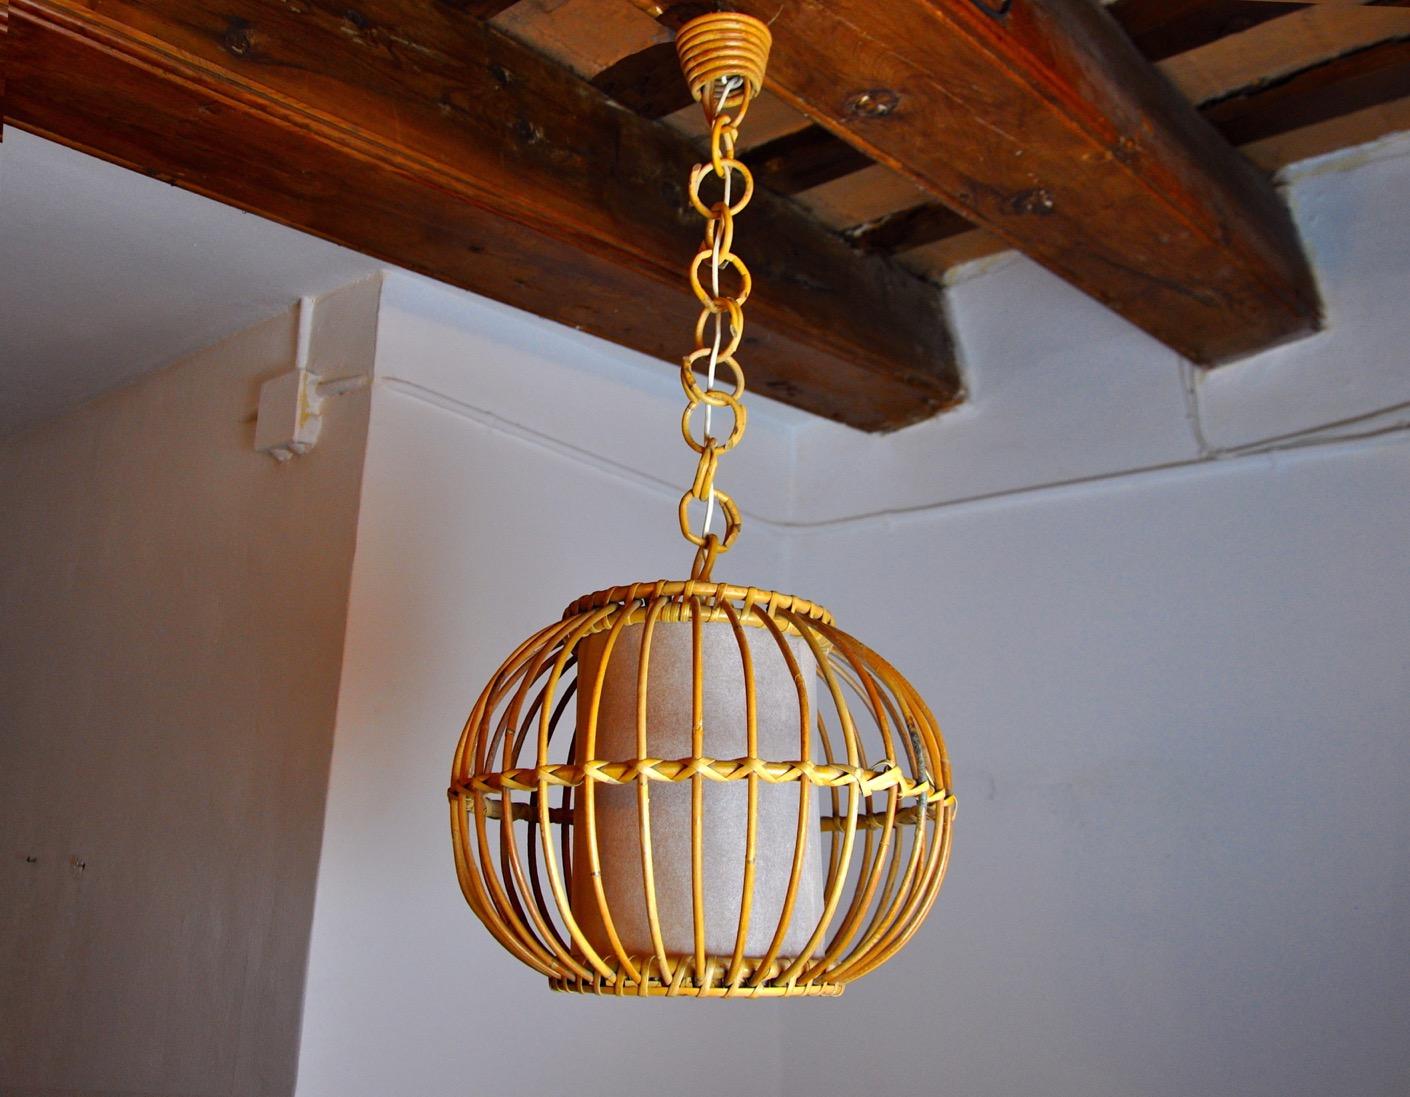 Very beautiful rattan suspension, designed and produced in France in the 1960s. A design classic that will illuminate your interior wonderfully and smells of the Mediterranean. Electricity checked, mark of time in accordance with the age of the